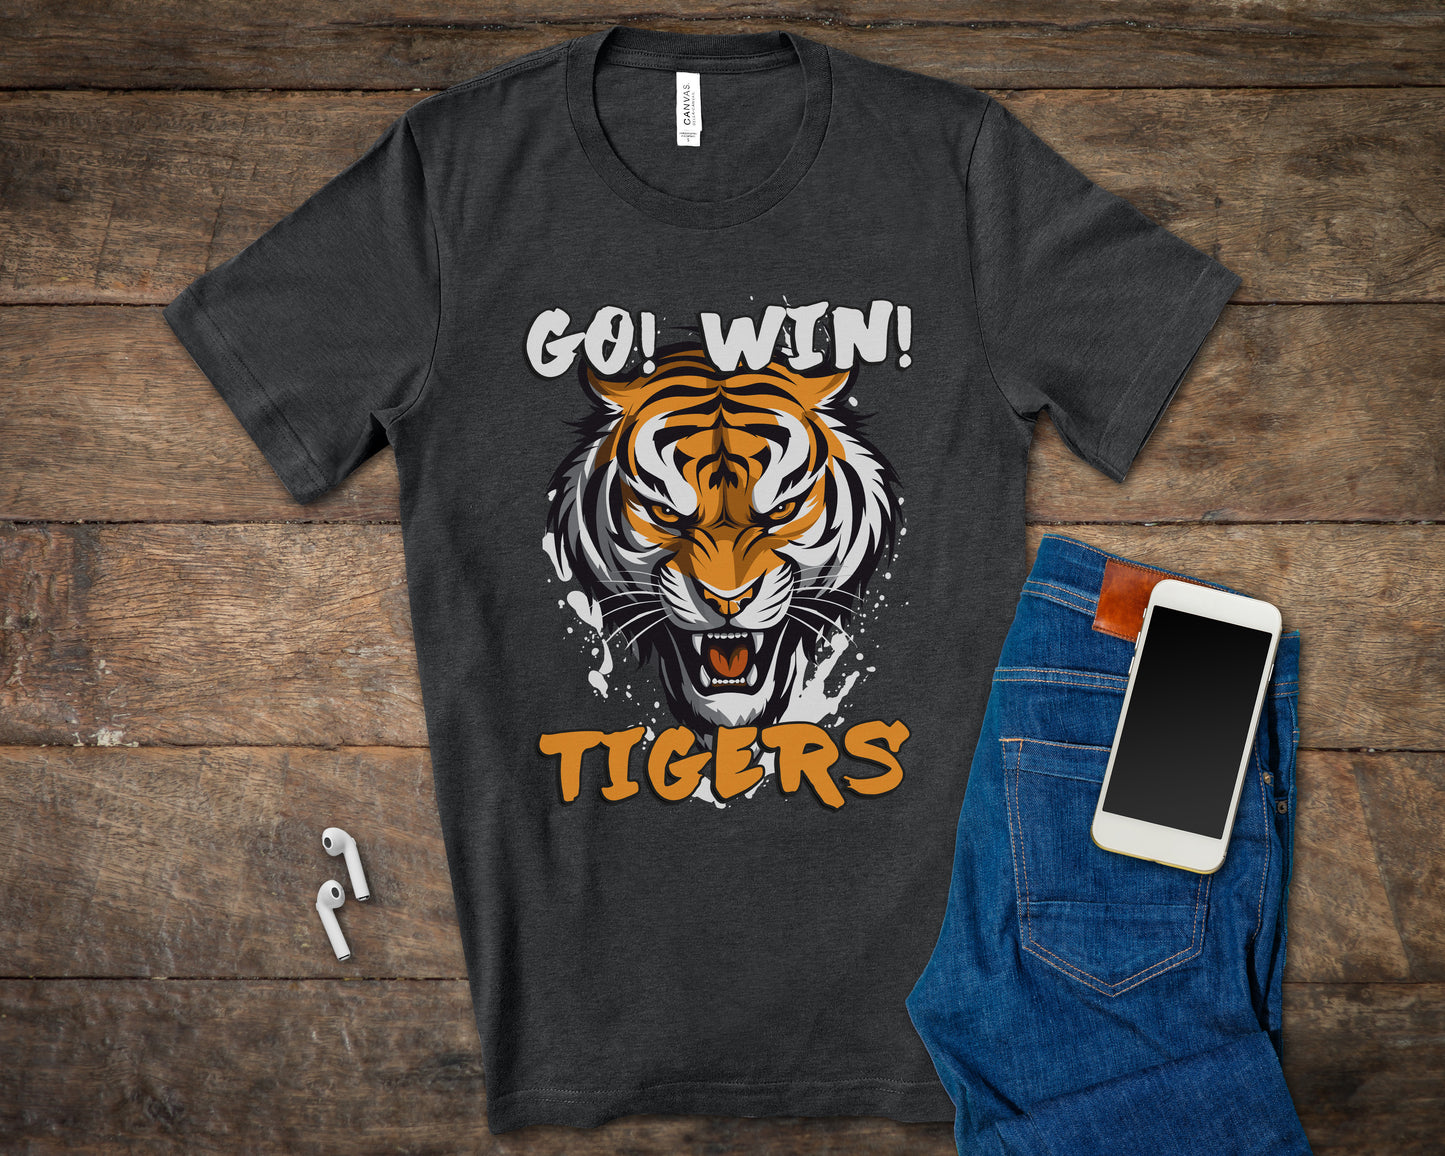 Go! Win! Tigers! Ferocious Tiger T-shirt for Supporting your team-T-Shirts-PureDesignTees